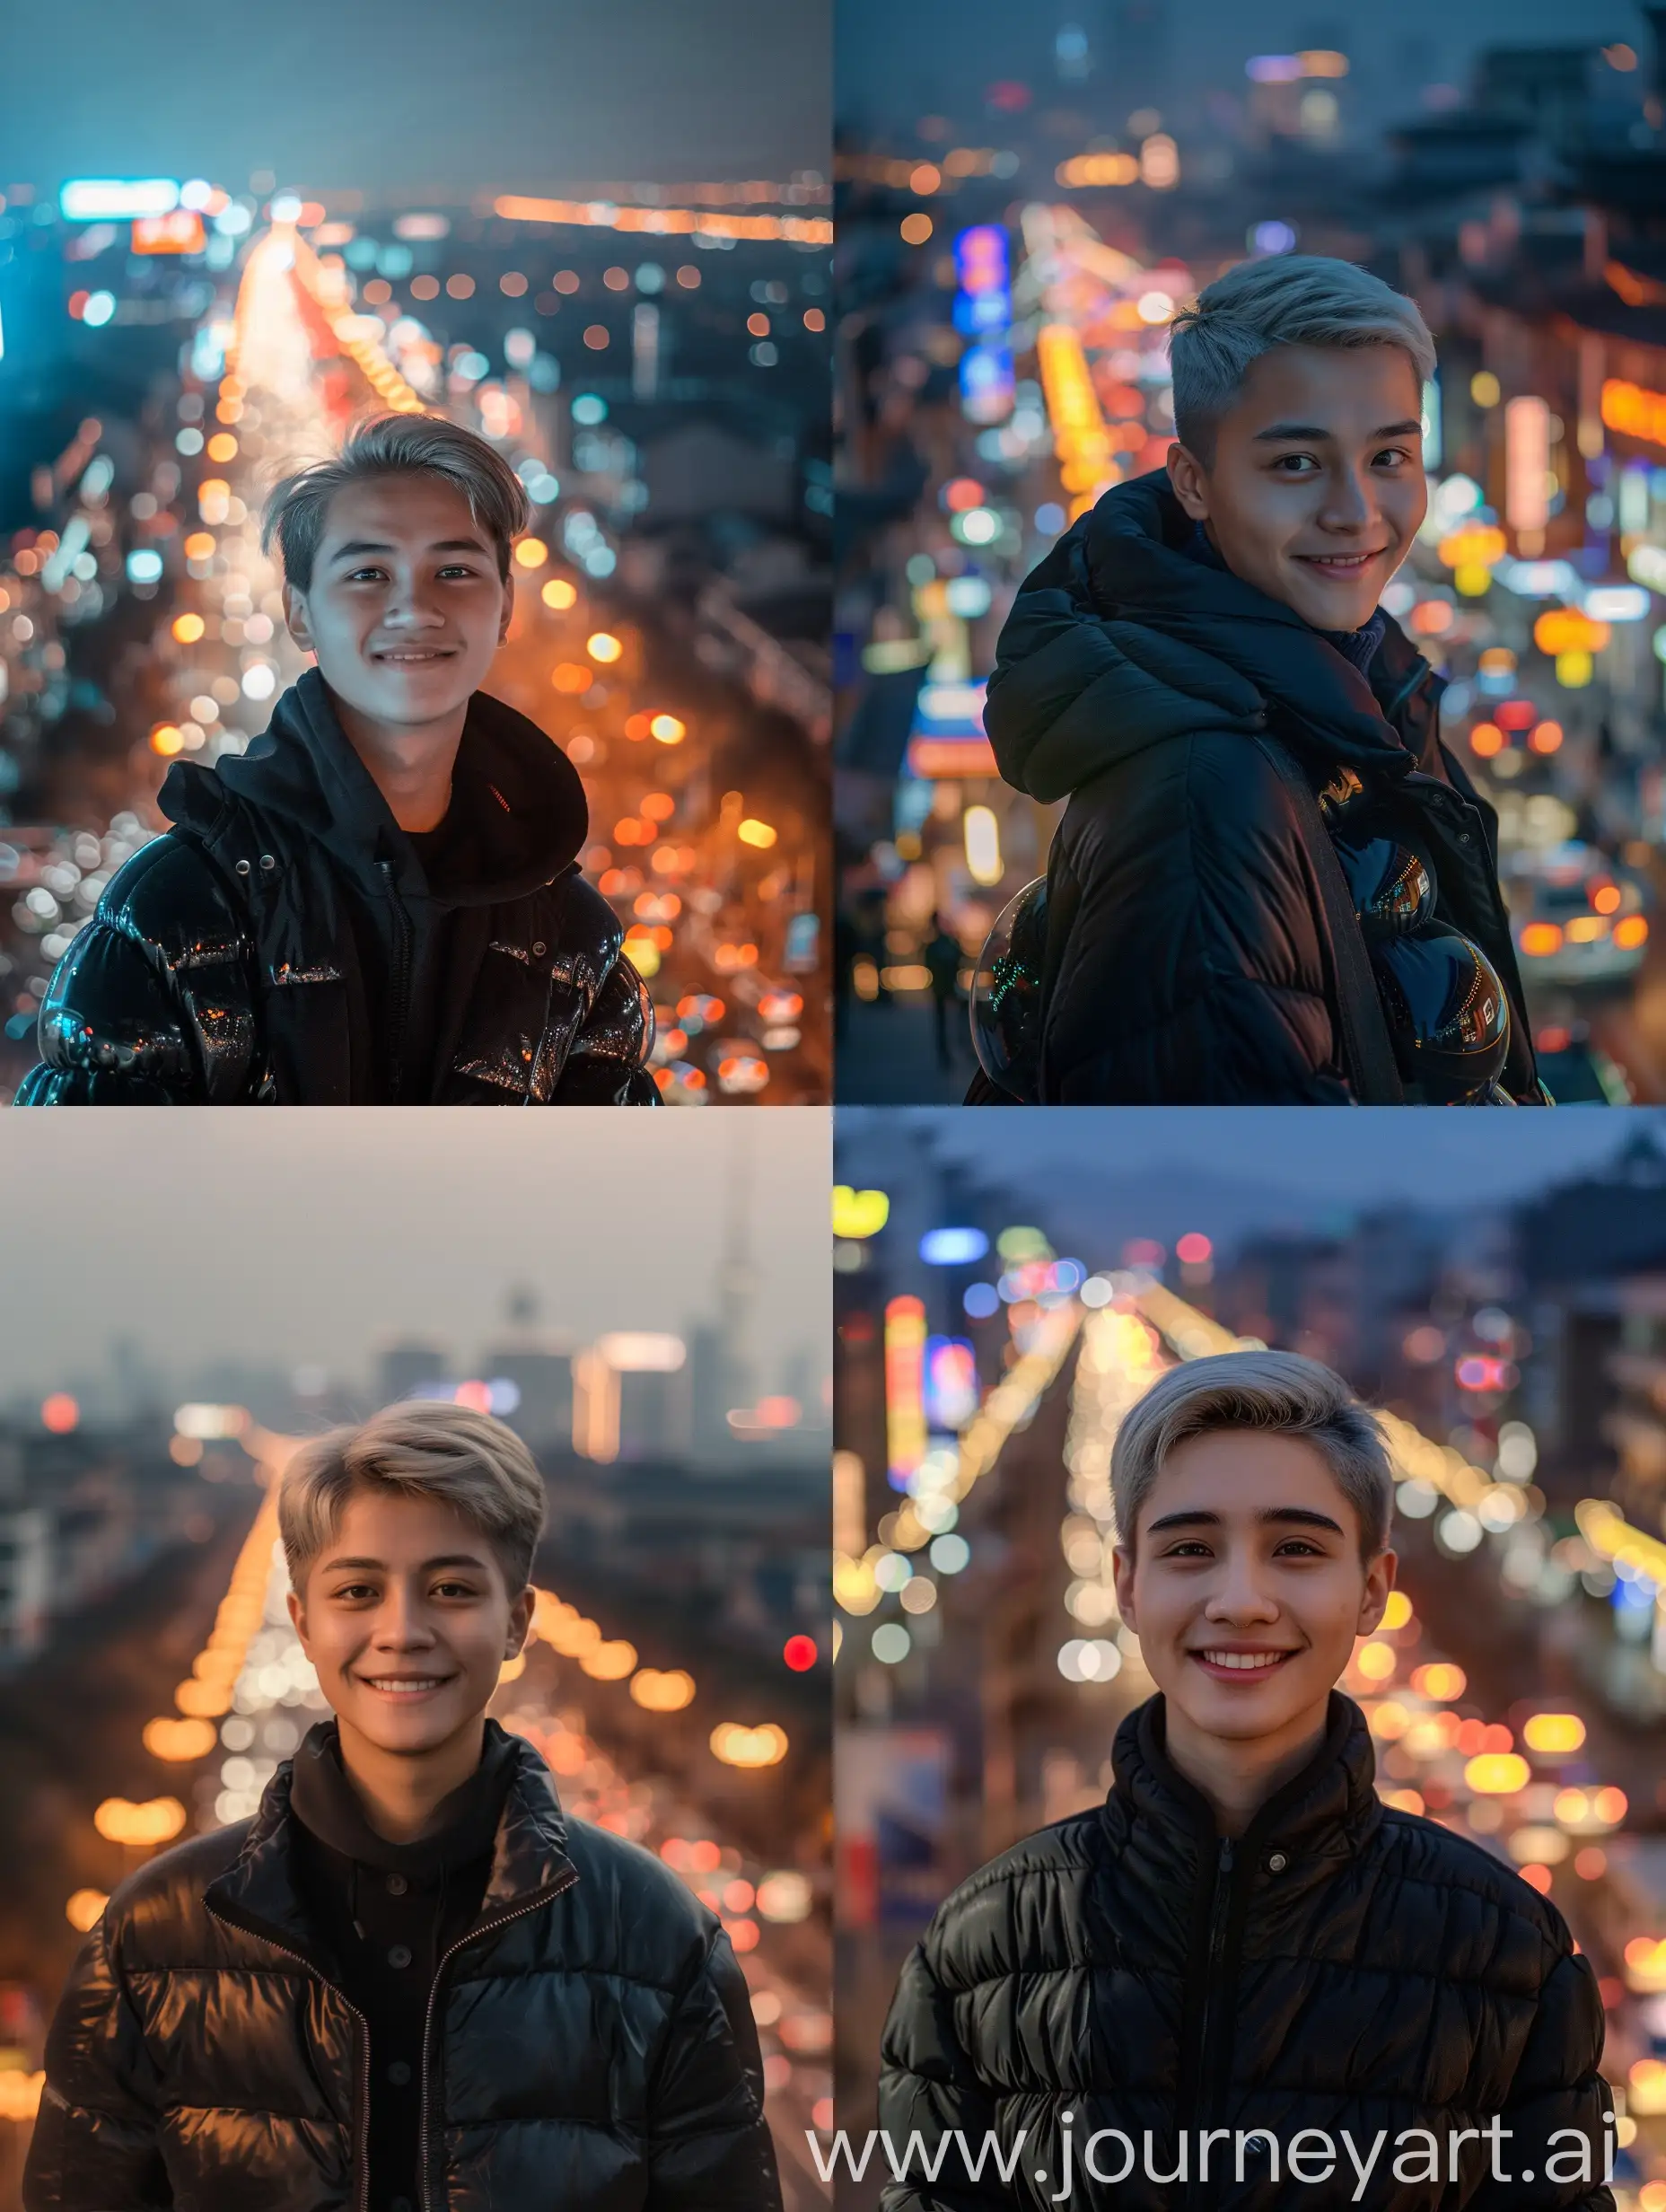 Smiling-Indonesian-Man-in-Black-Bubble-Jacket-amidst-Bustling-Chinese-City-Nightlife